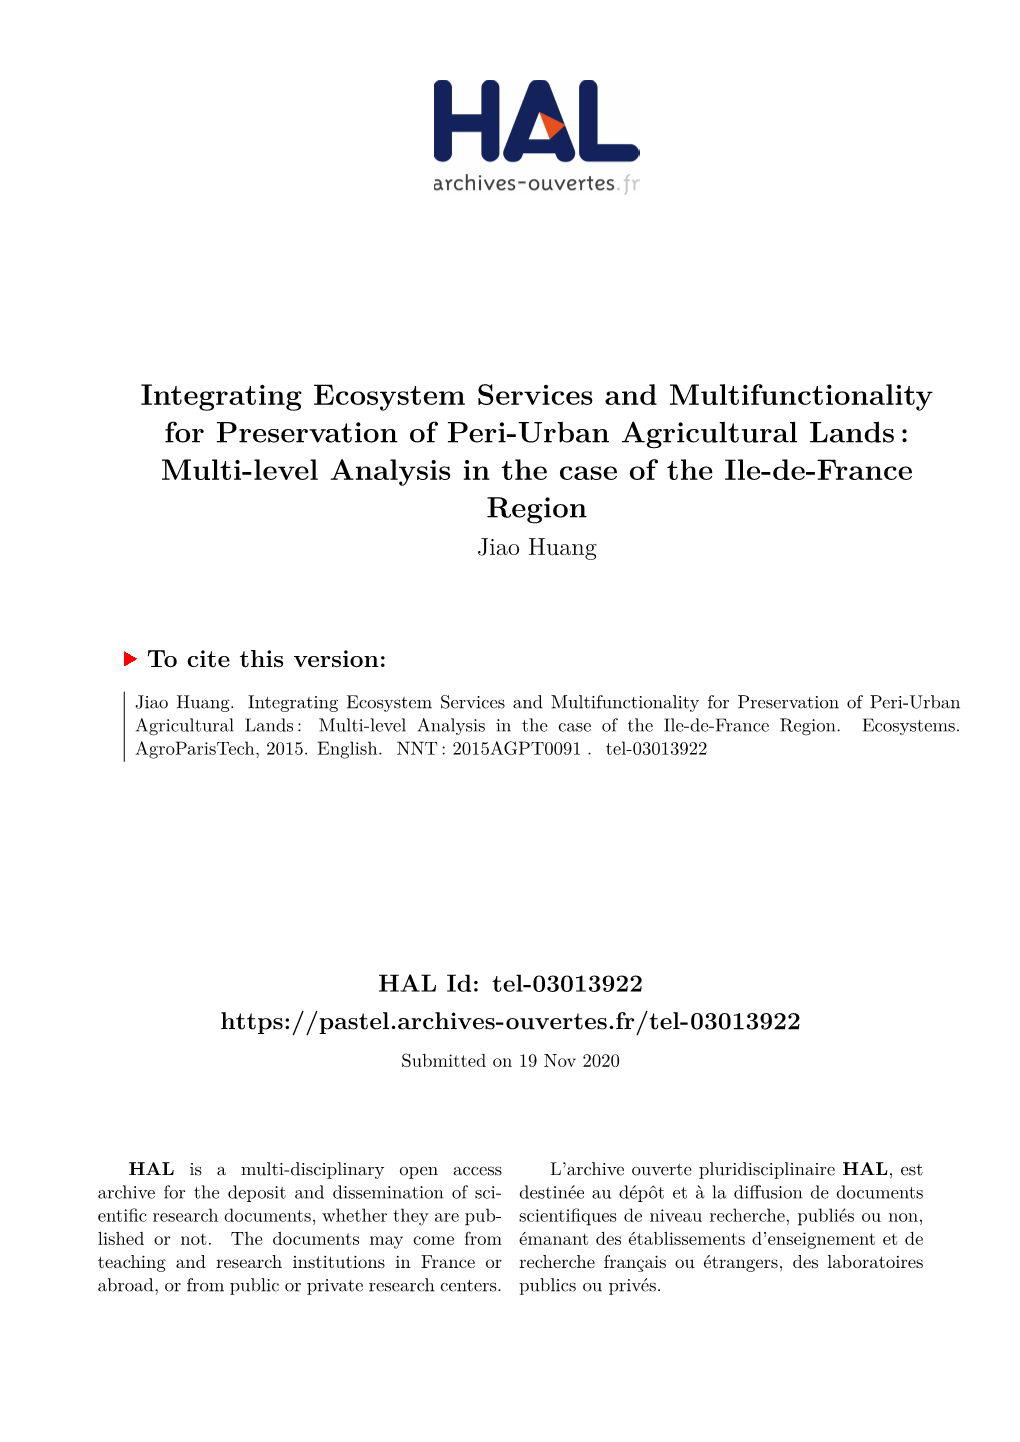 Integrating Ecosystem Services and Multifunctionality for Preservation Of